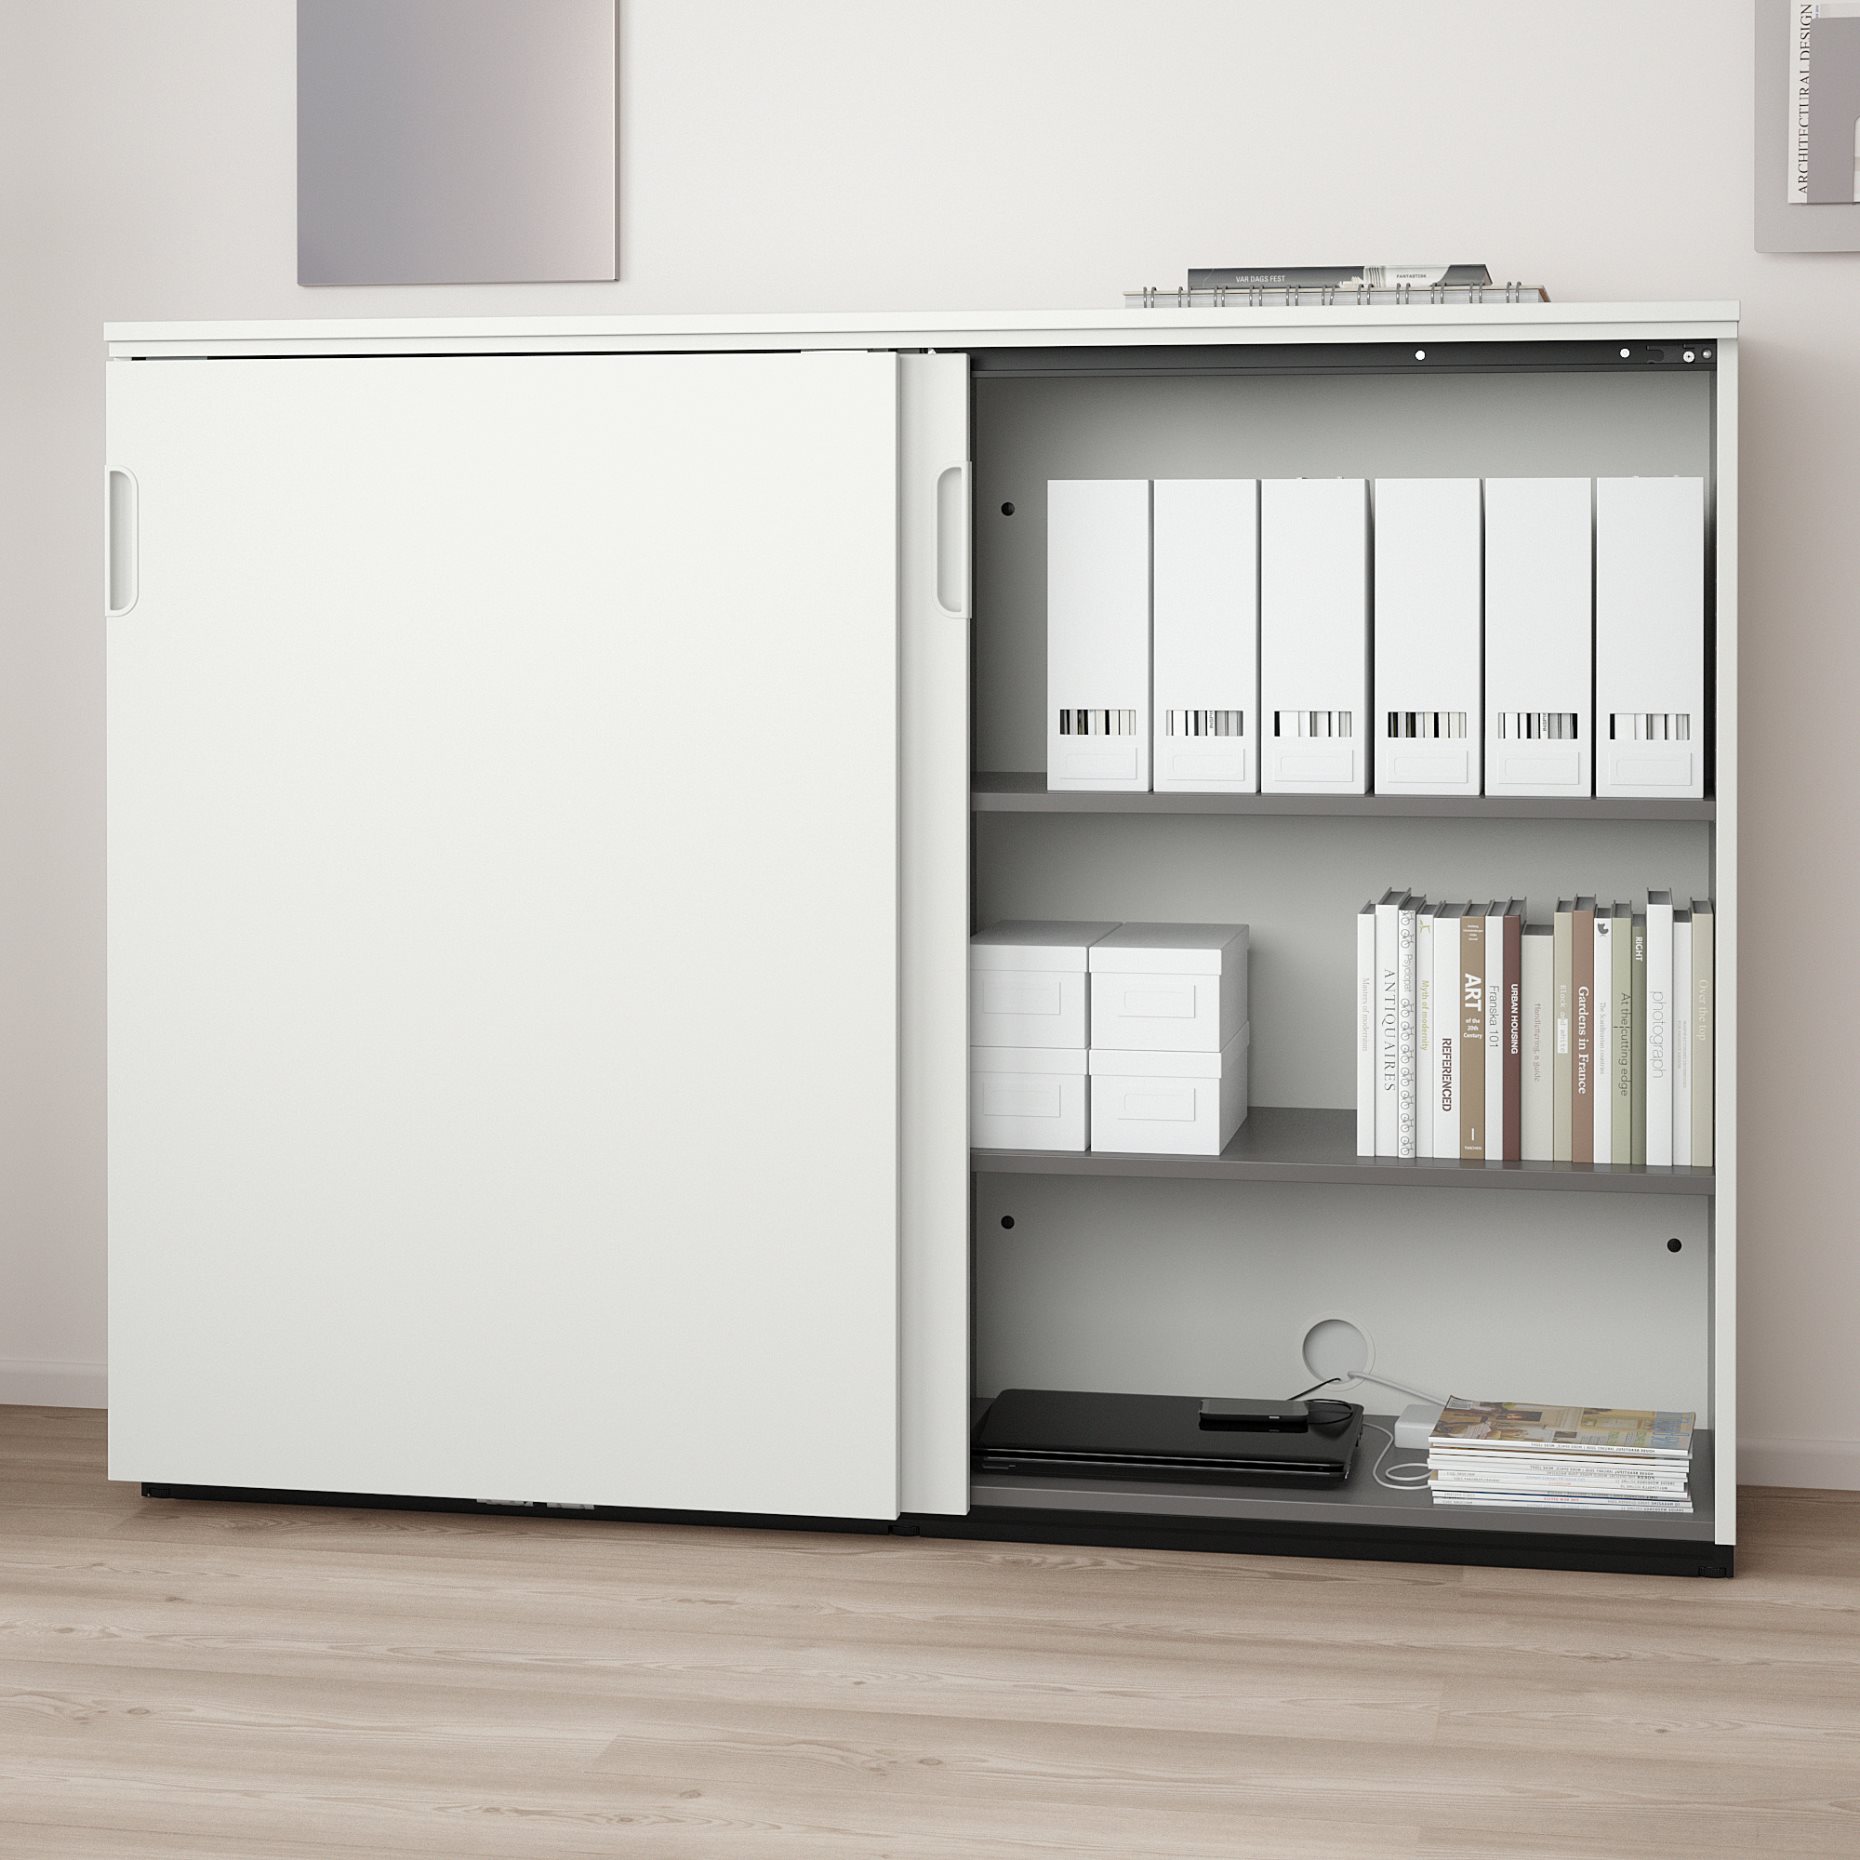 GALANT, cabinet with sliding doors, 303.651.35